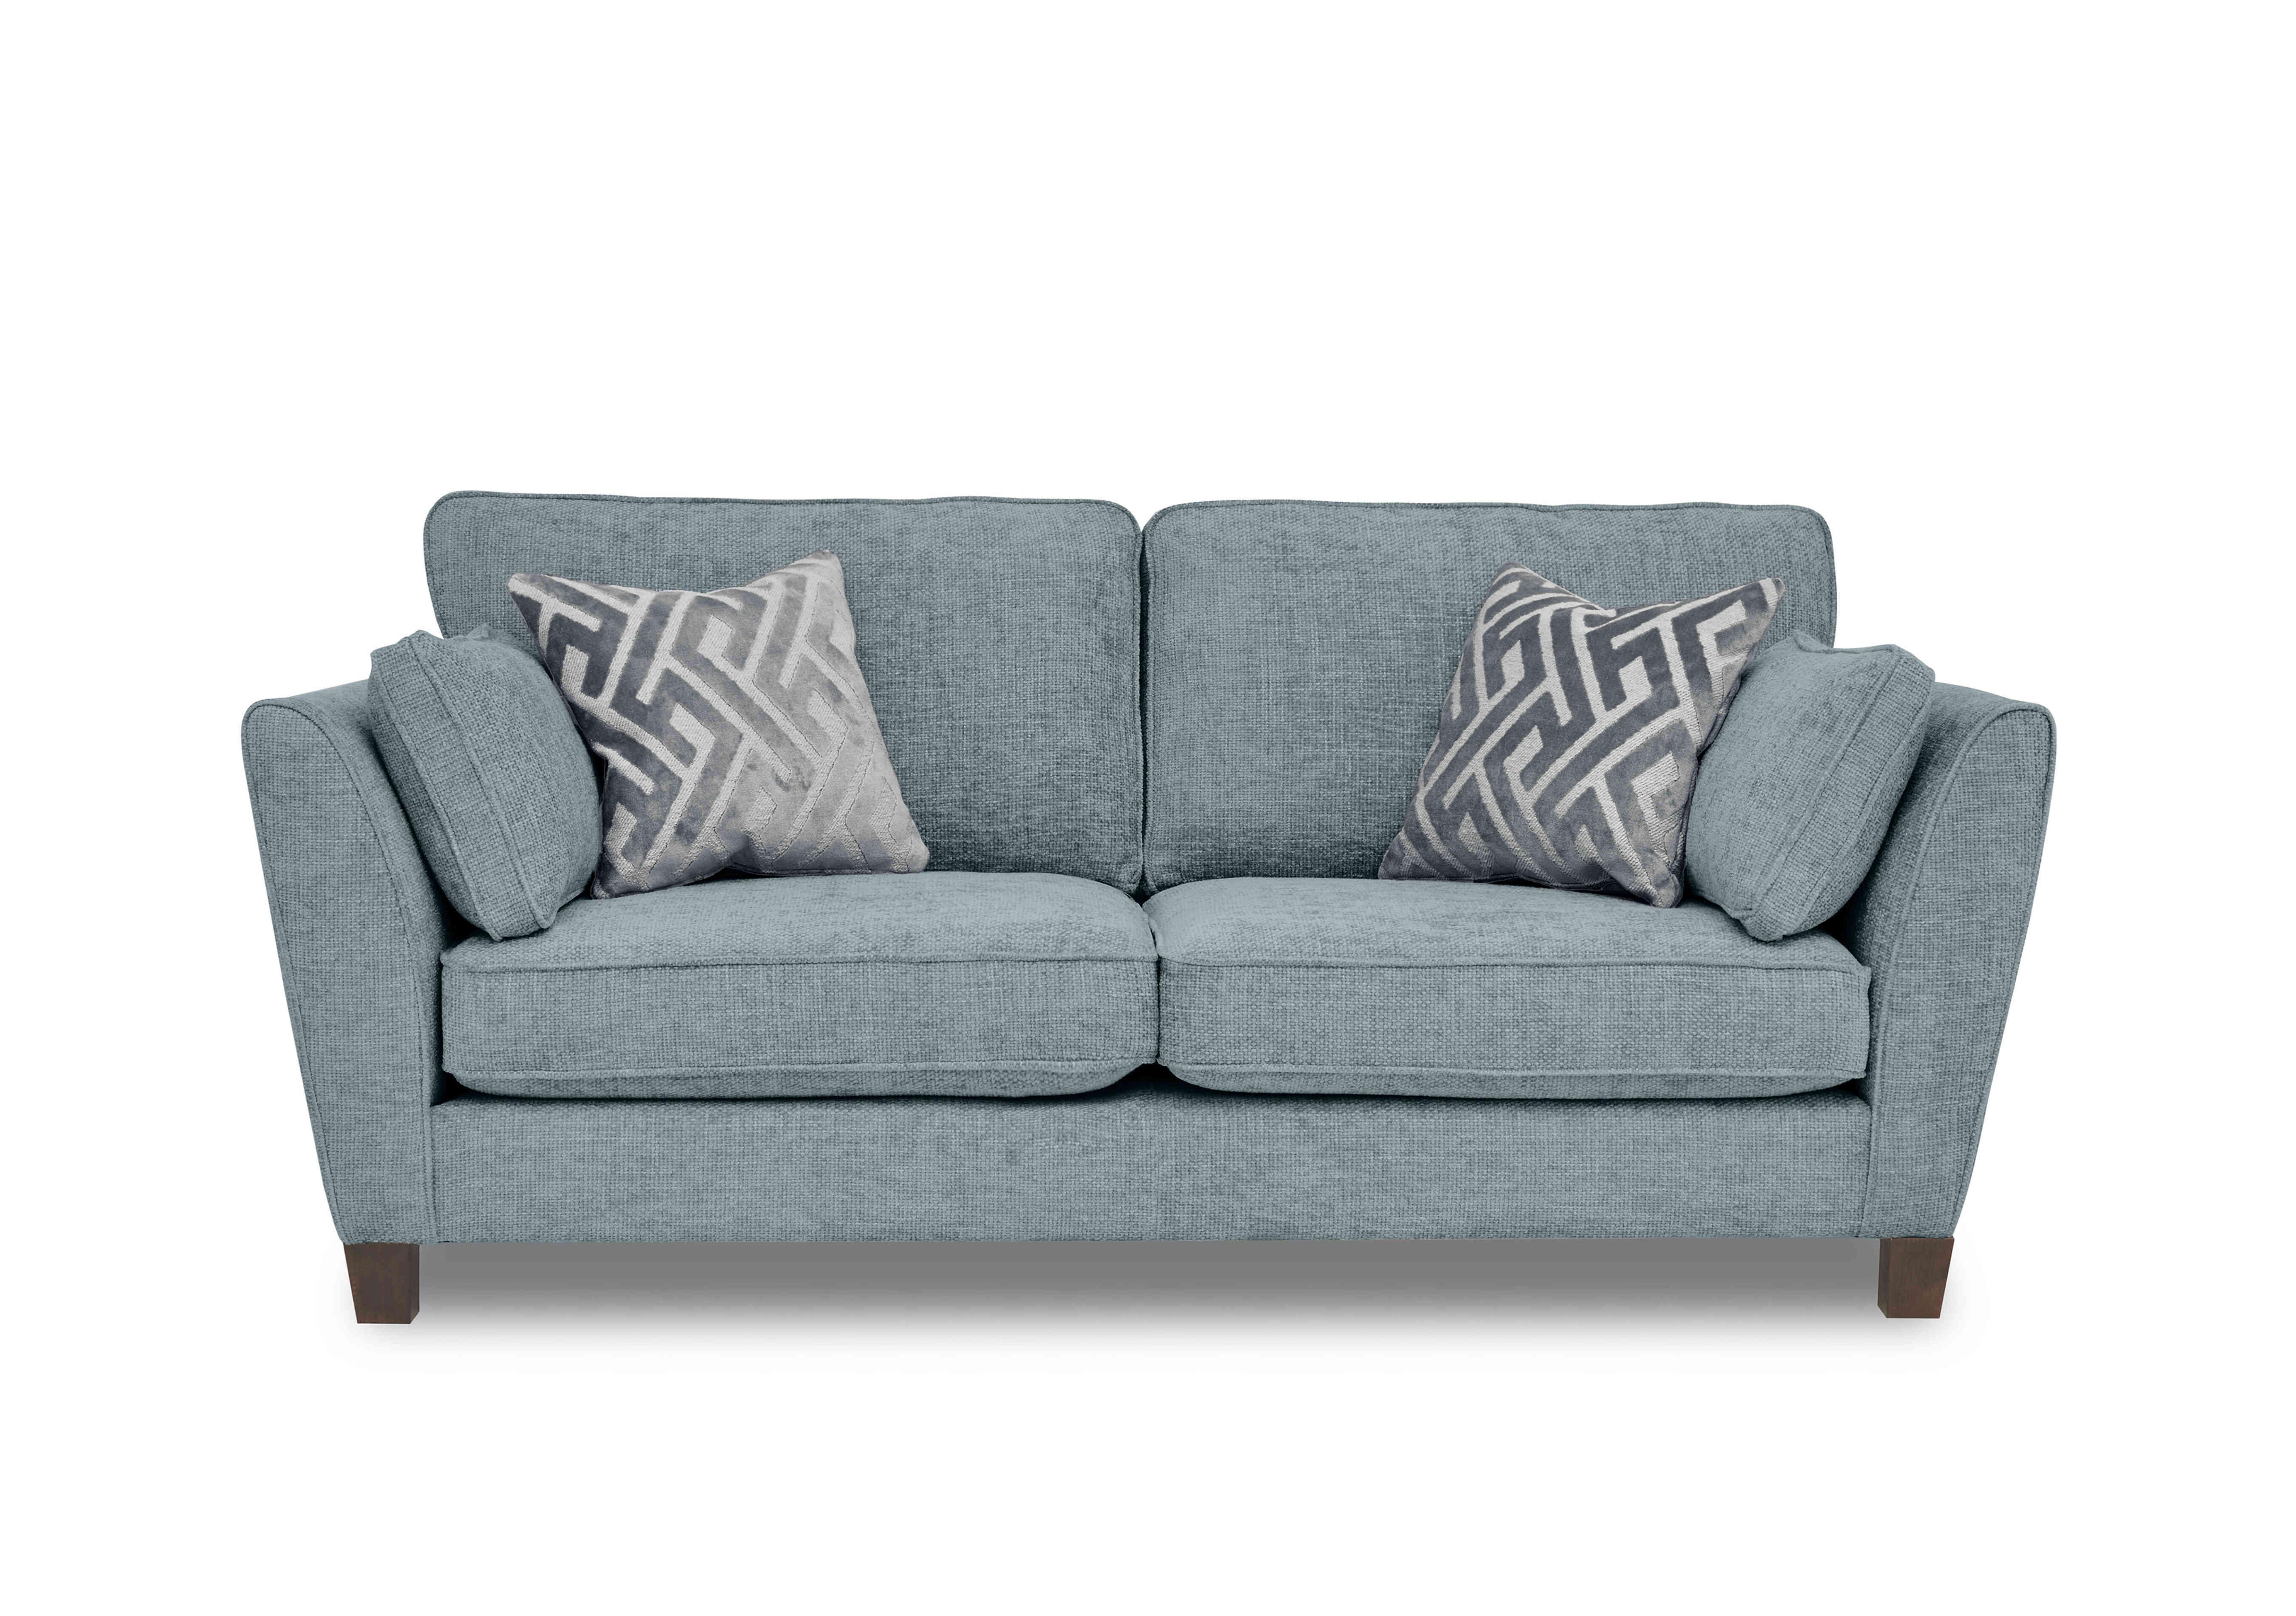 Tabitha 3 Seater Sofa in Duck Egg on Furniture Village